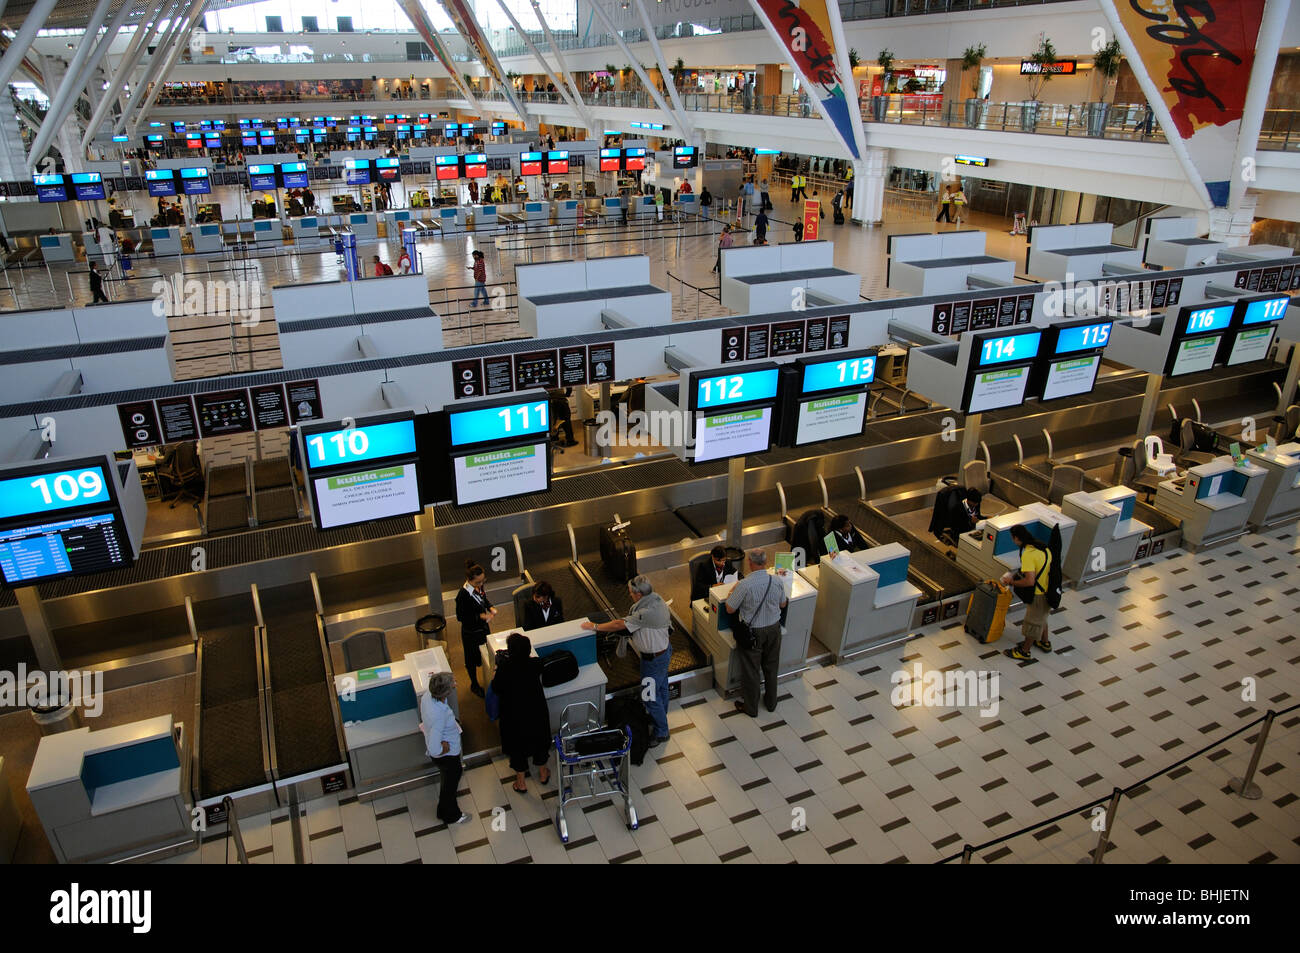 Passengers at Kulula airline check in desks Cape Town International Airport central terminal building Stock Photo